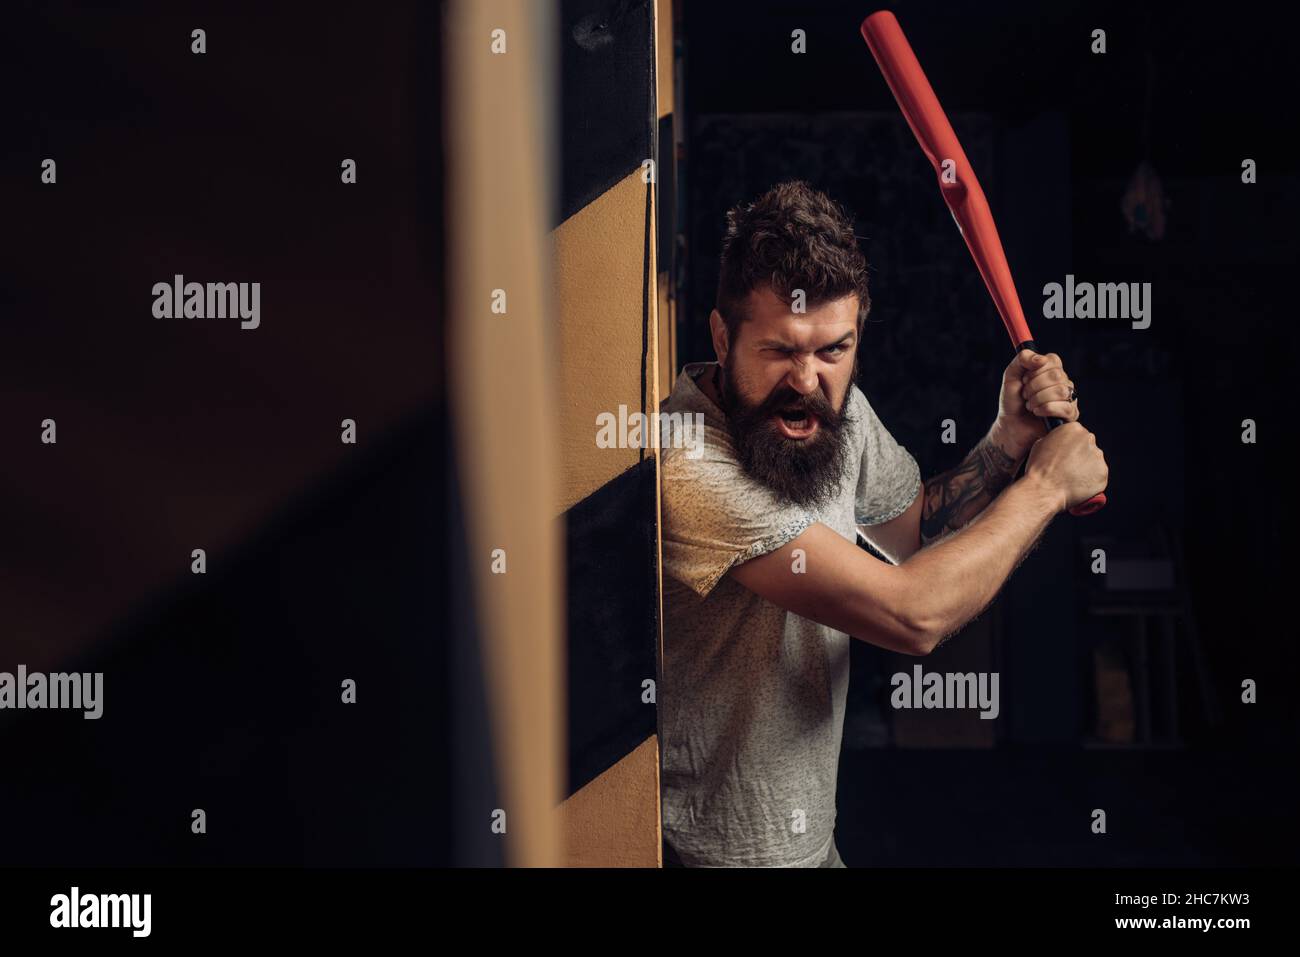 Brutal angry gang man lifestyle, serious handsome guy holding baseball bat  Stock Photo - Alamy